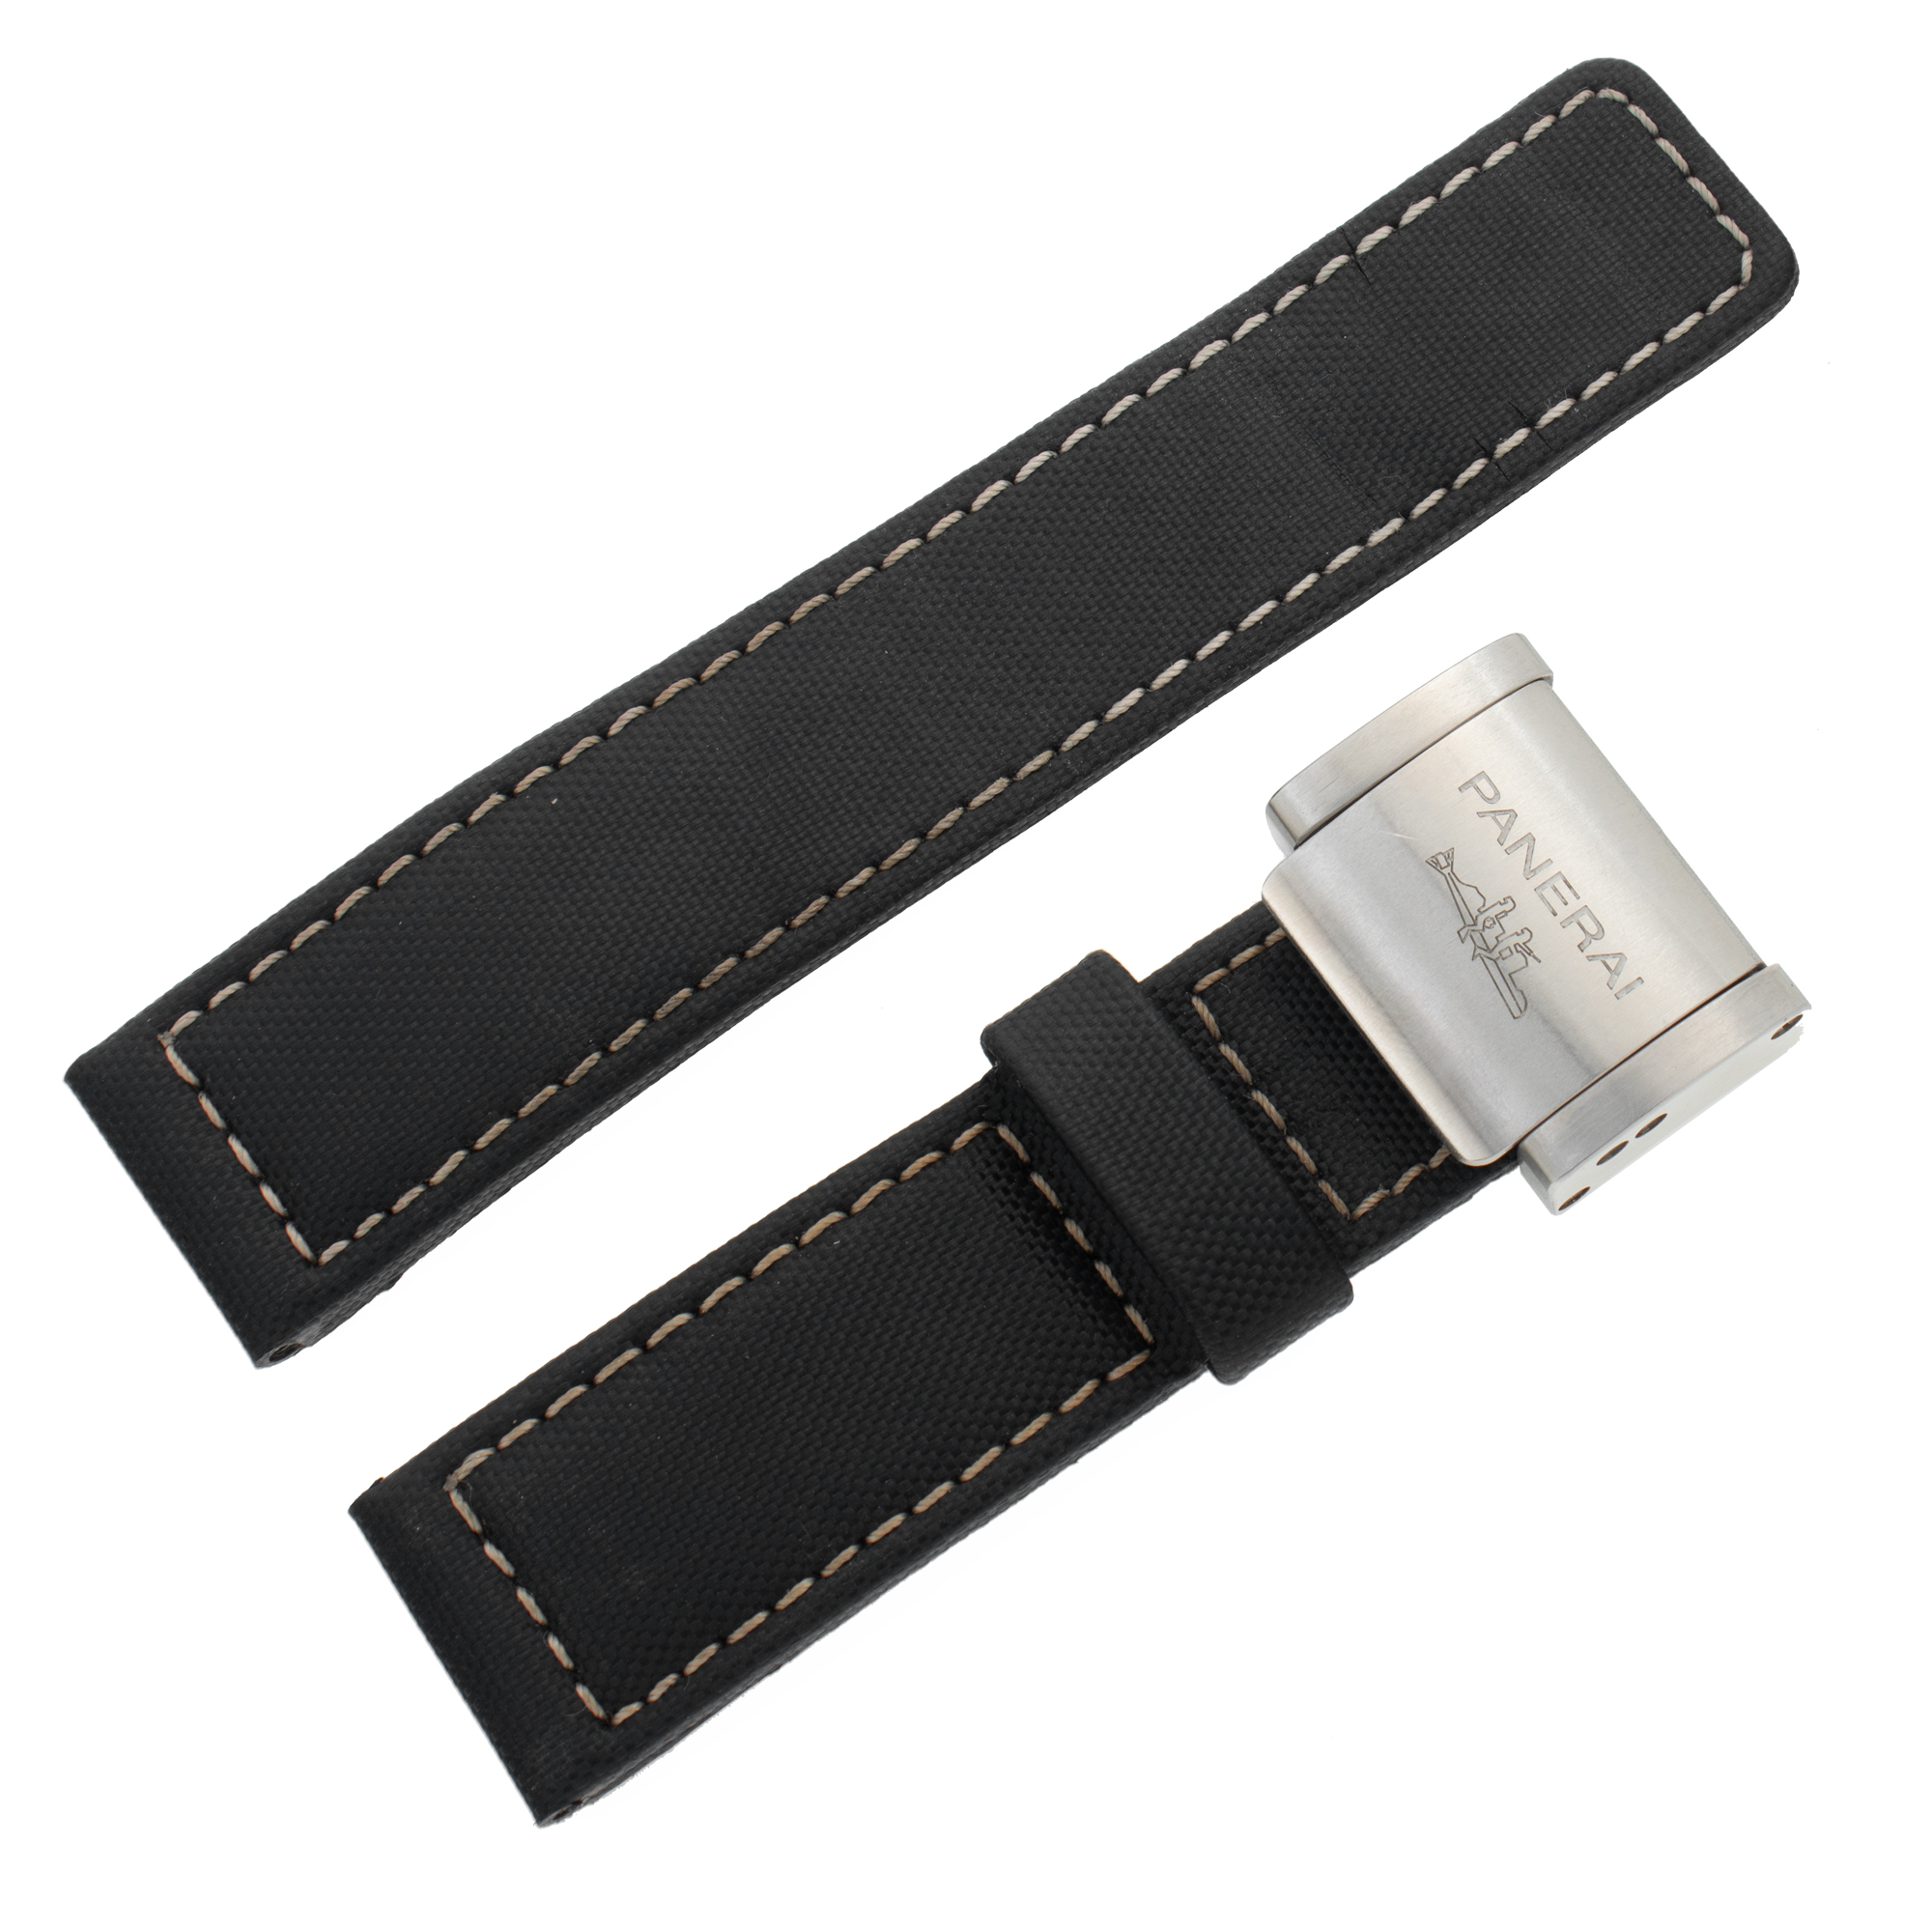 Gently worn Panerai fabric strap with stainless steel Panerai clasp buckle image 1